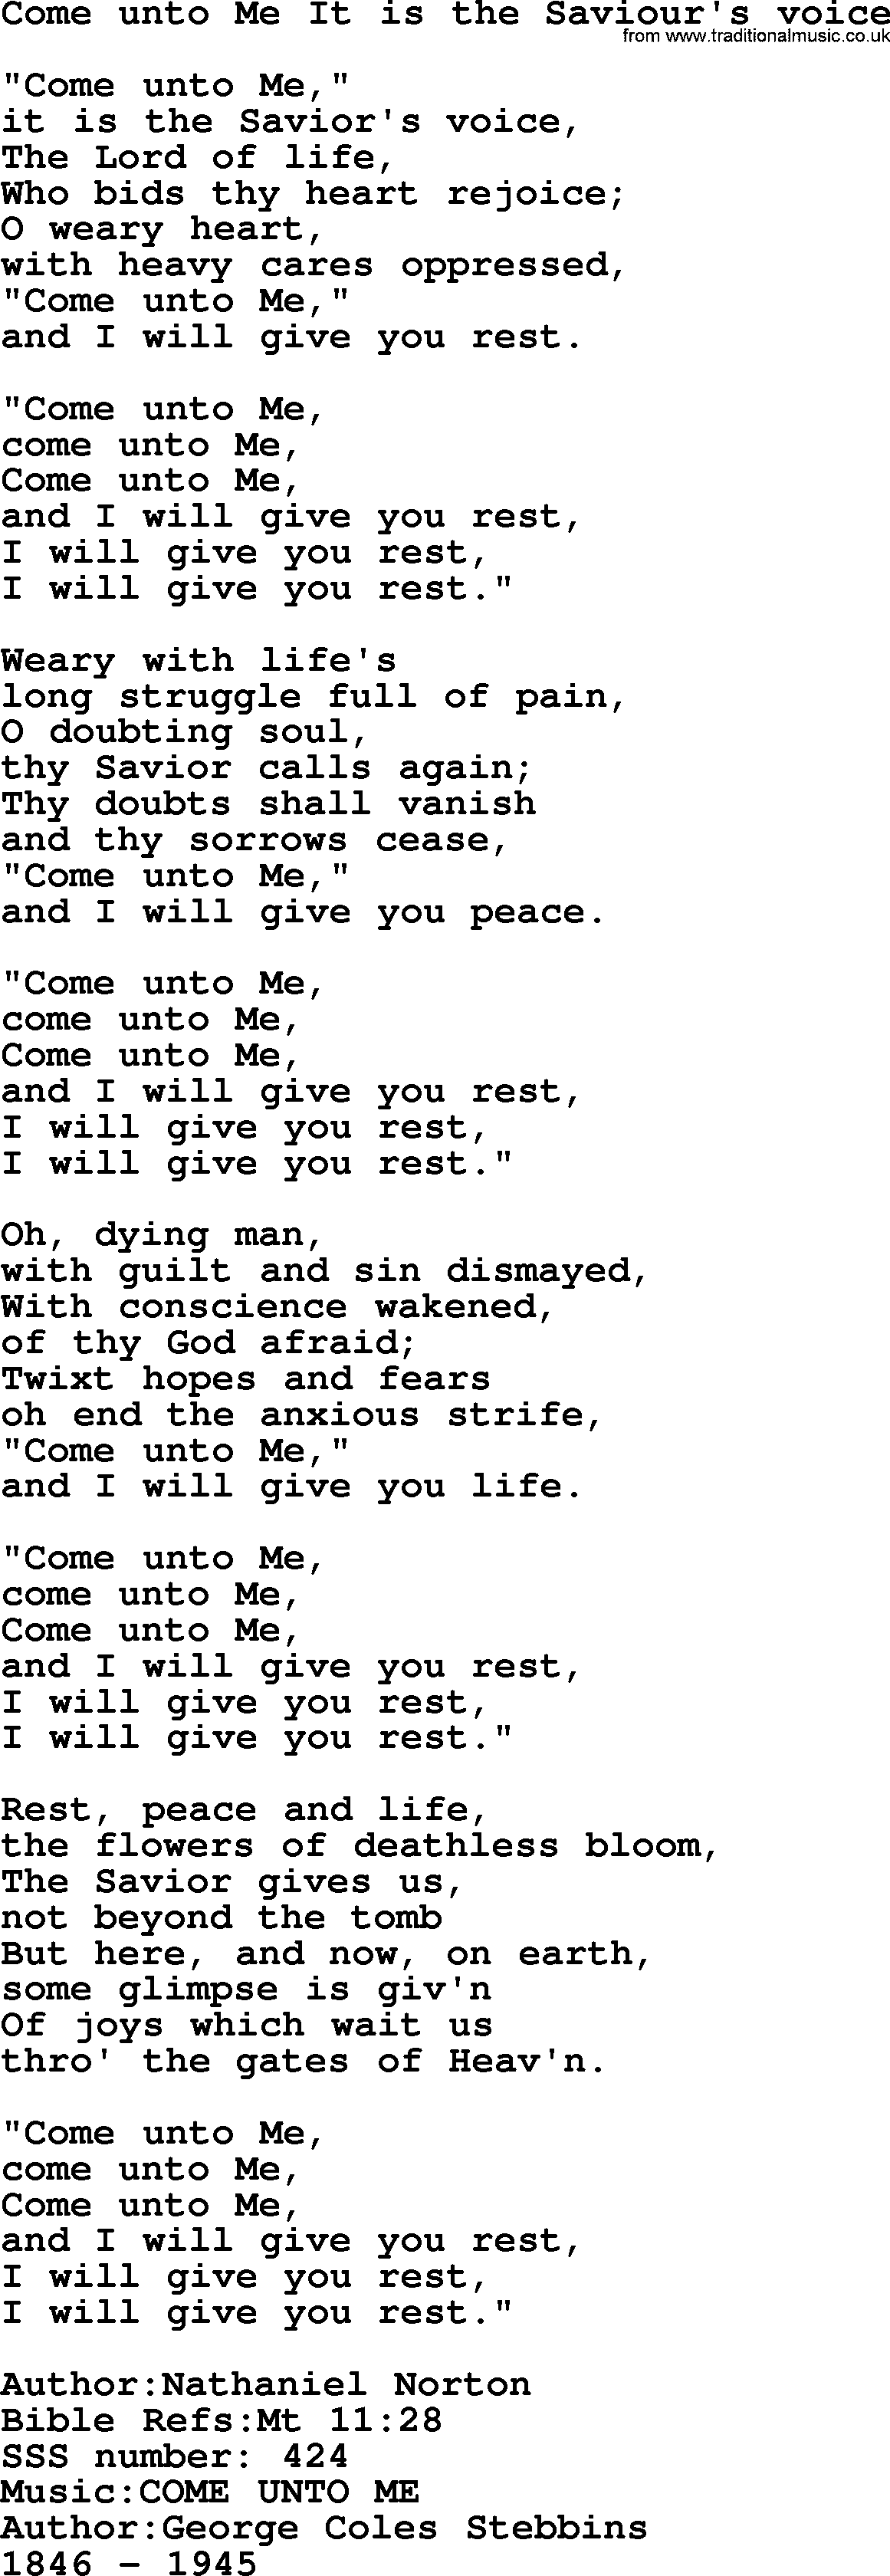 Sacred Songs and Solos complete, 1200 Hymns, title: Come Unto Me It Is The Saviour's Voice, lyrics and PDF